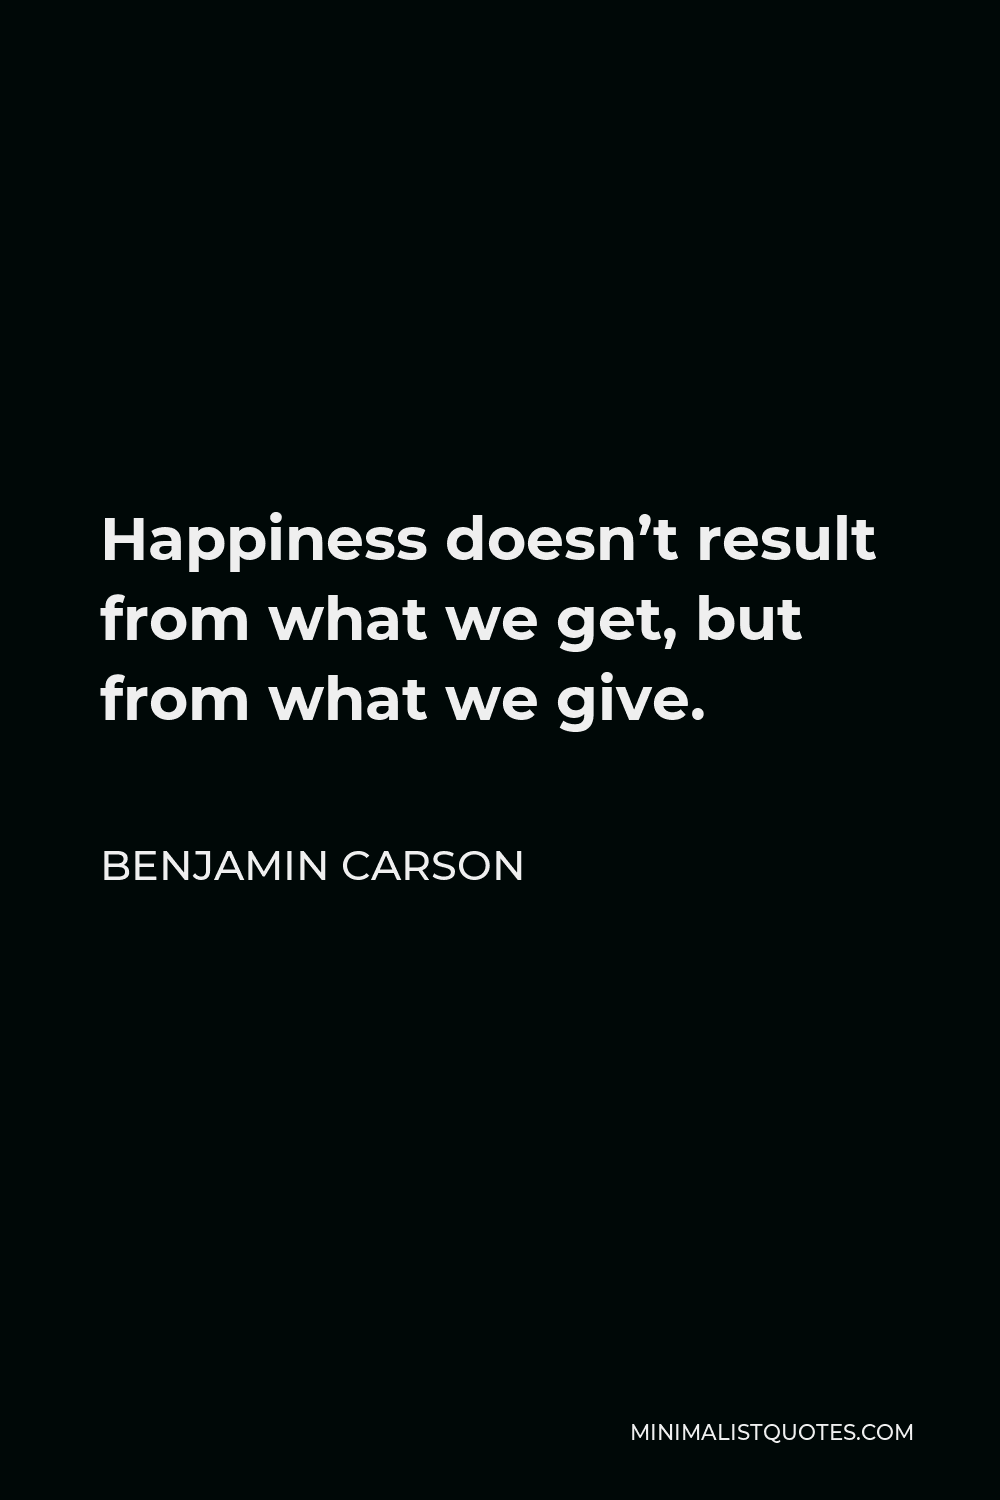 Benjamin Carson Quote - Happiness doesn’t result from what we get, but from what we give.